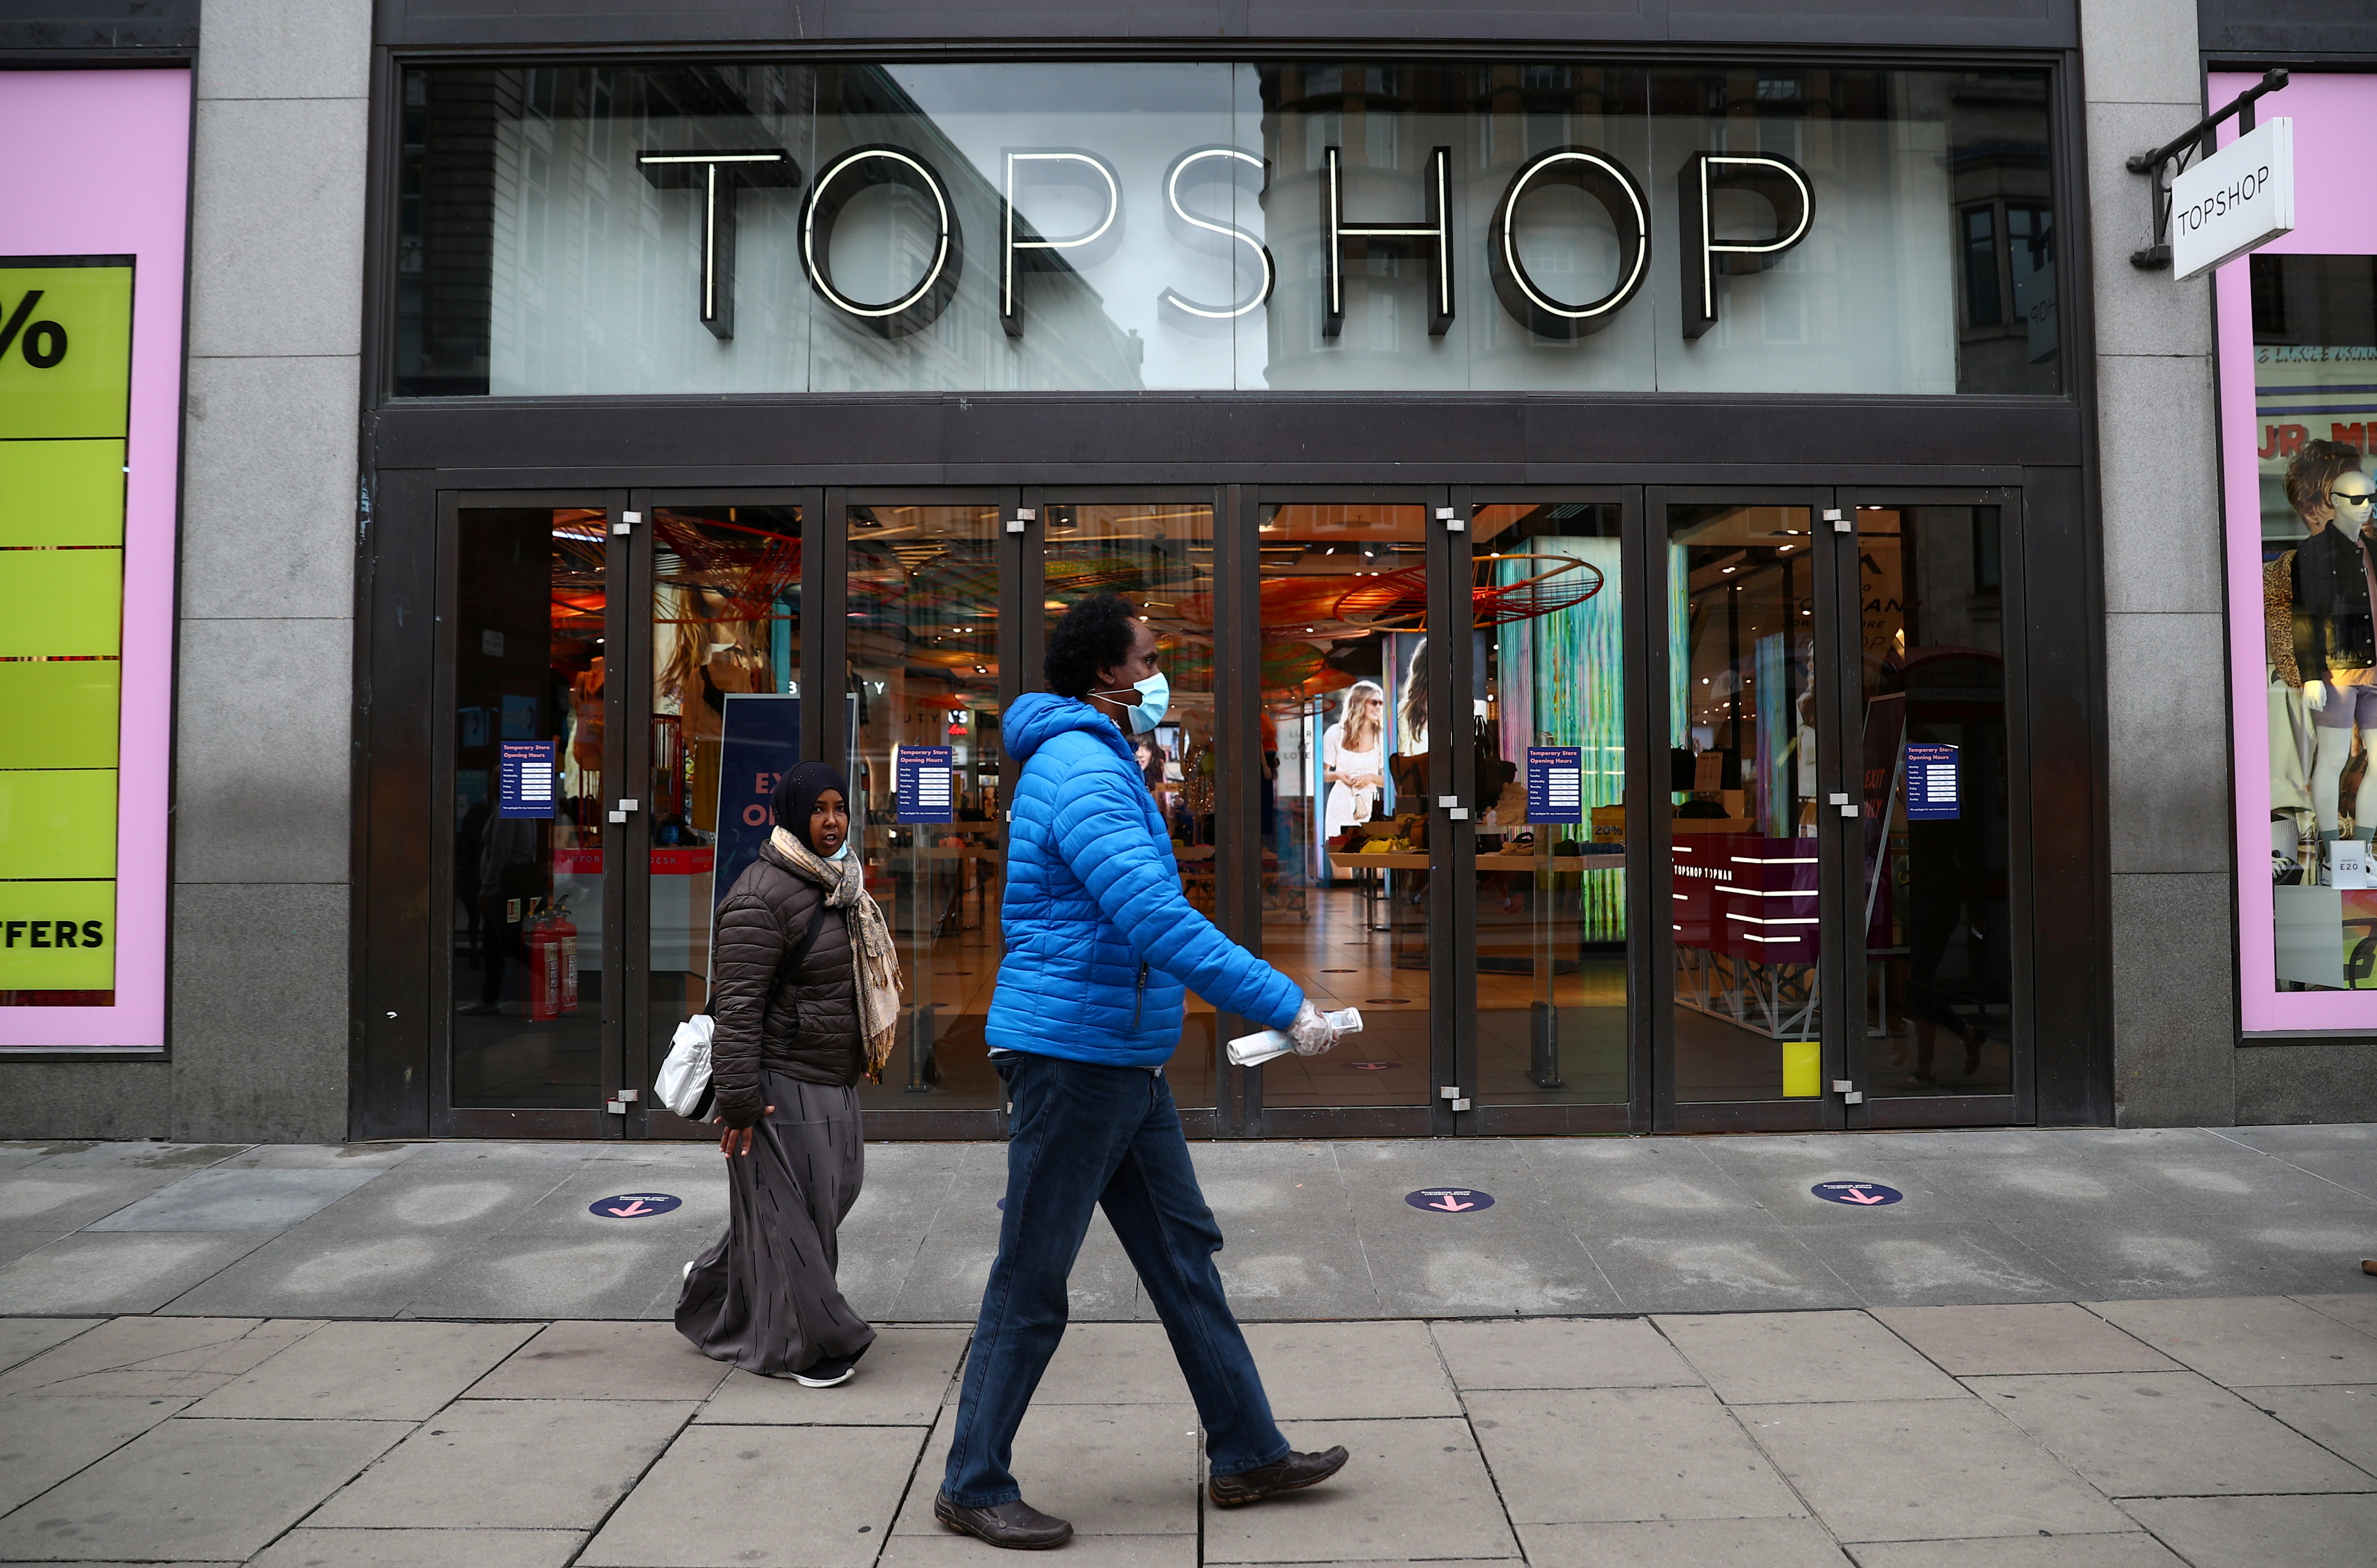 People walk past an entrance to the Topshop store at the Oxford Street, in London, Britain July 2, 2020. REUTERS/Hannah McKay